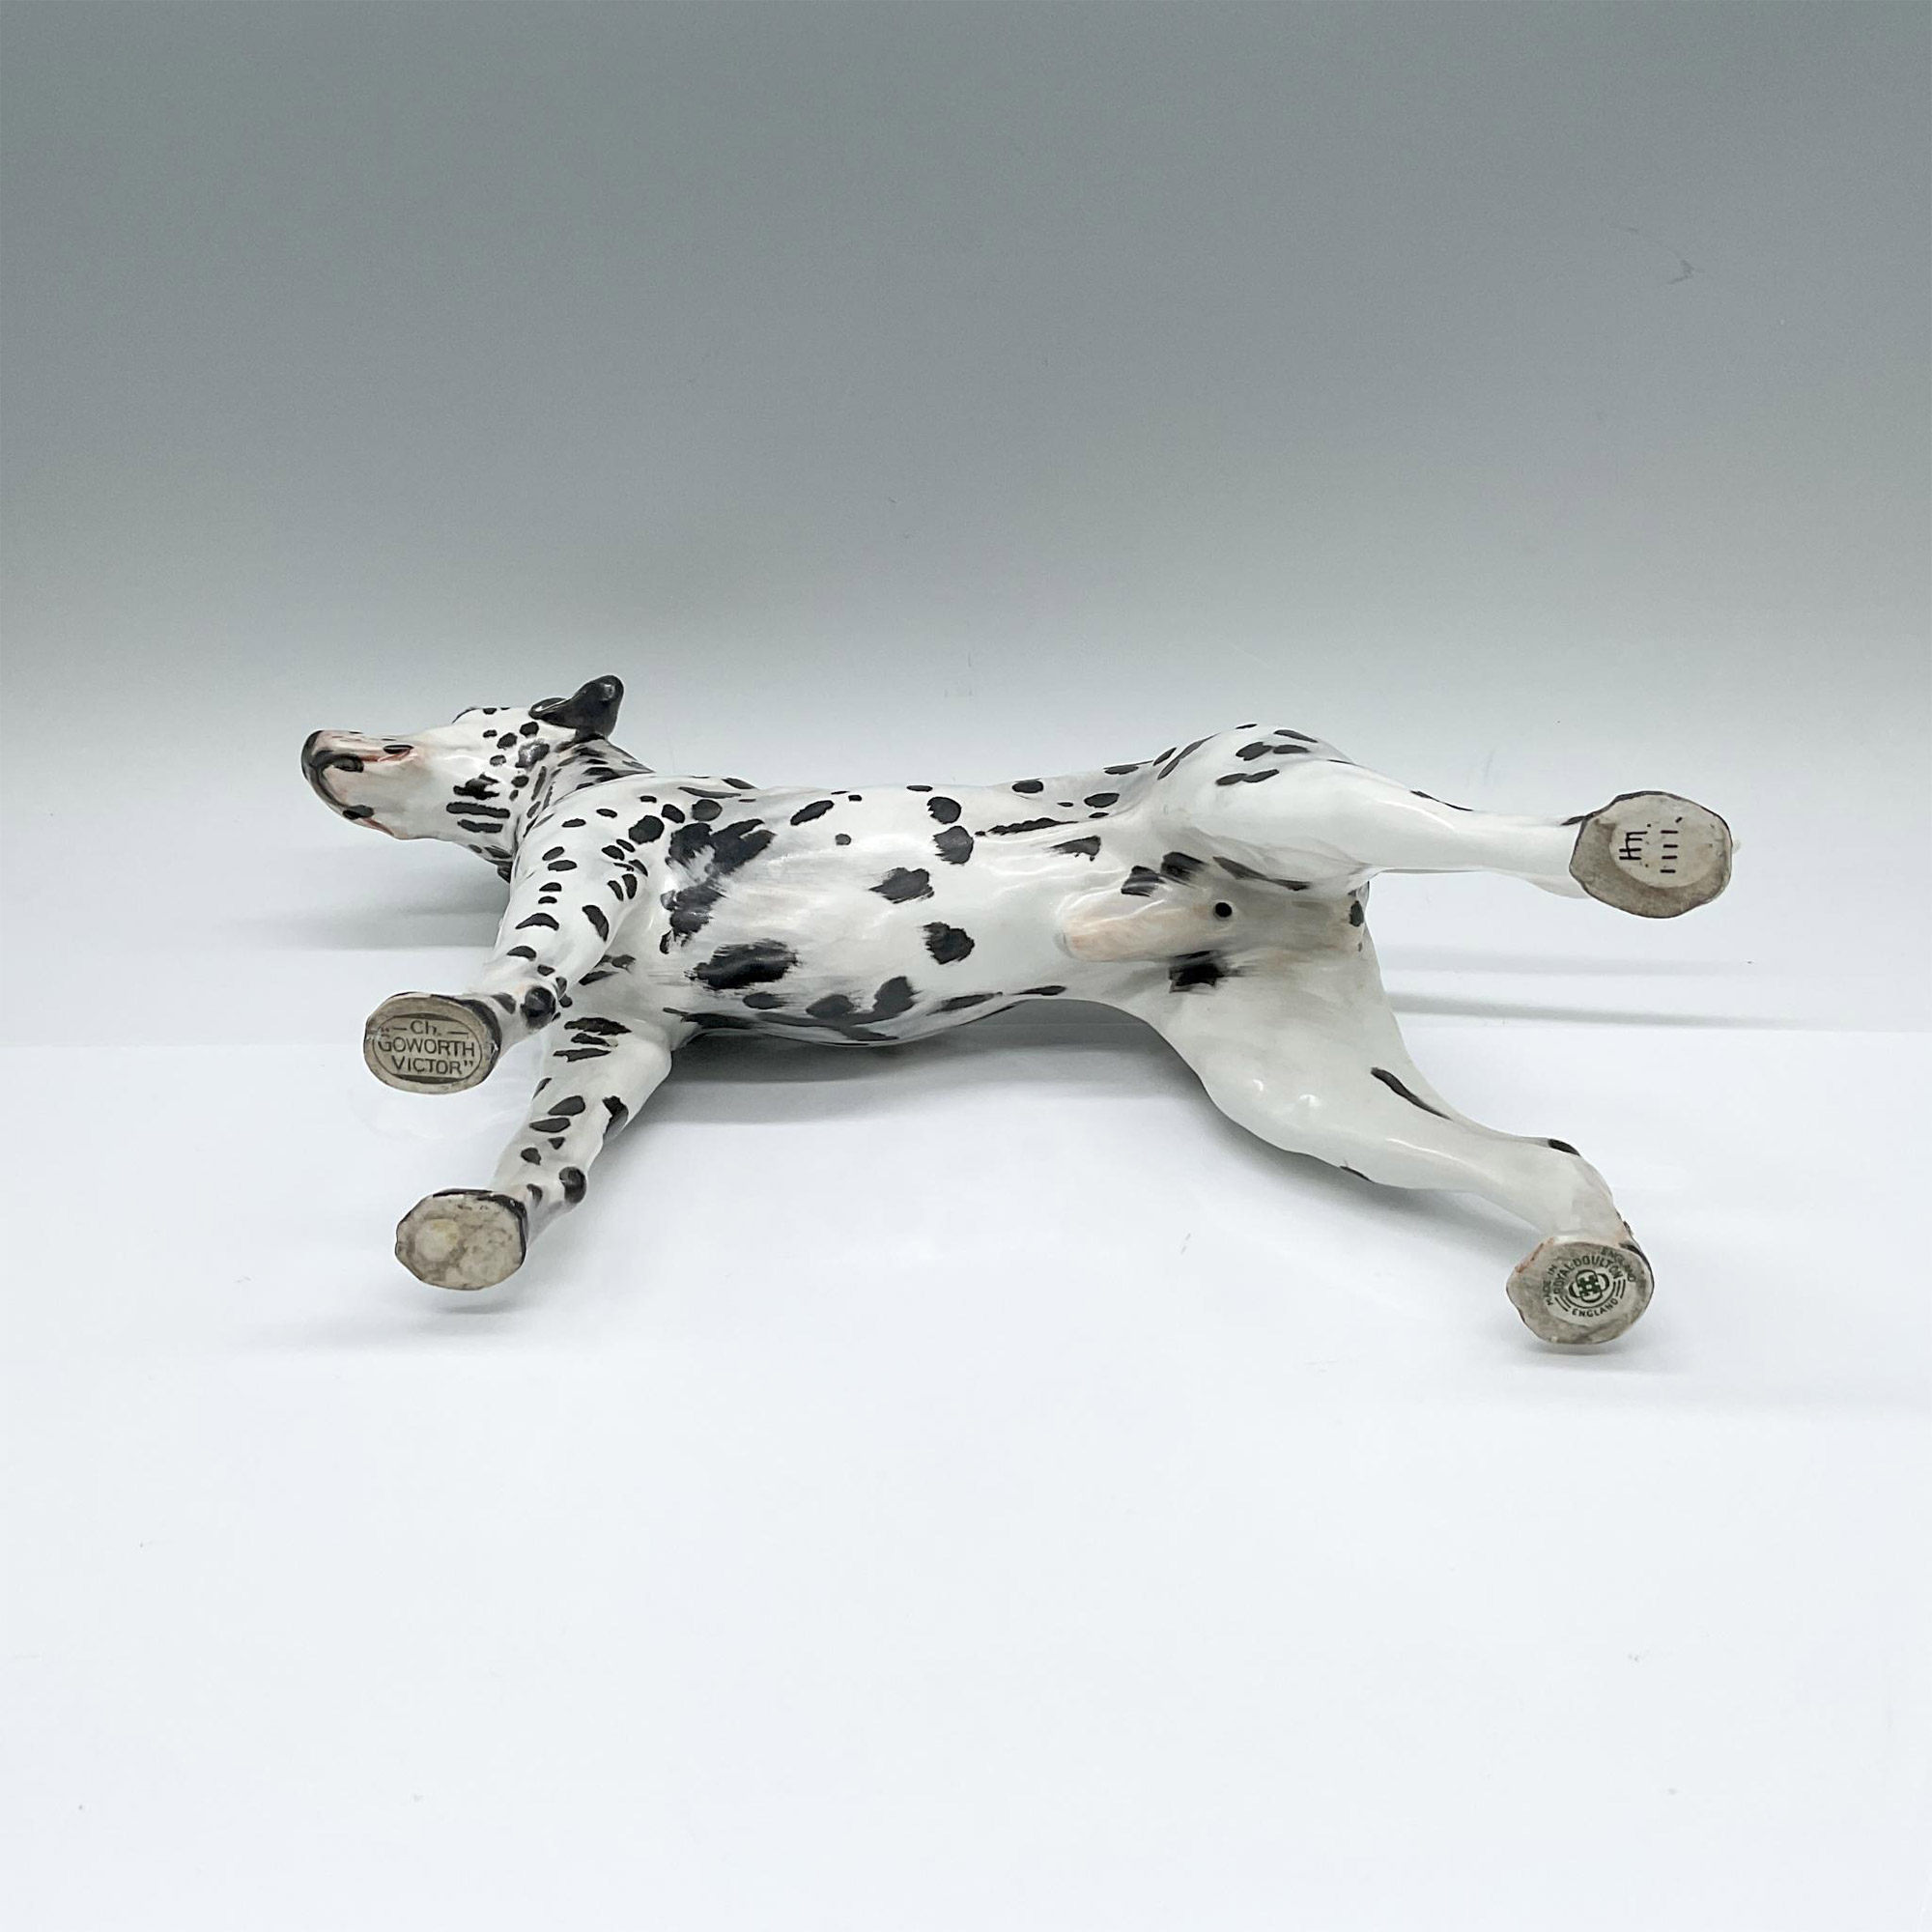 Dalmatian Ch. Goworth Victor HN1111 - Royal Doulton Animal Figurine - Image 3 of 3